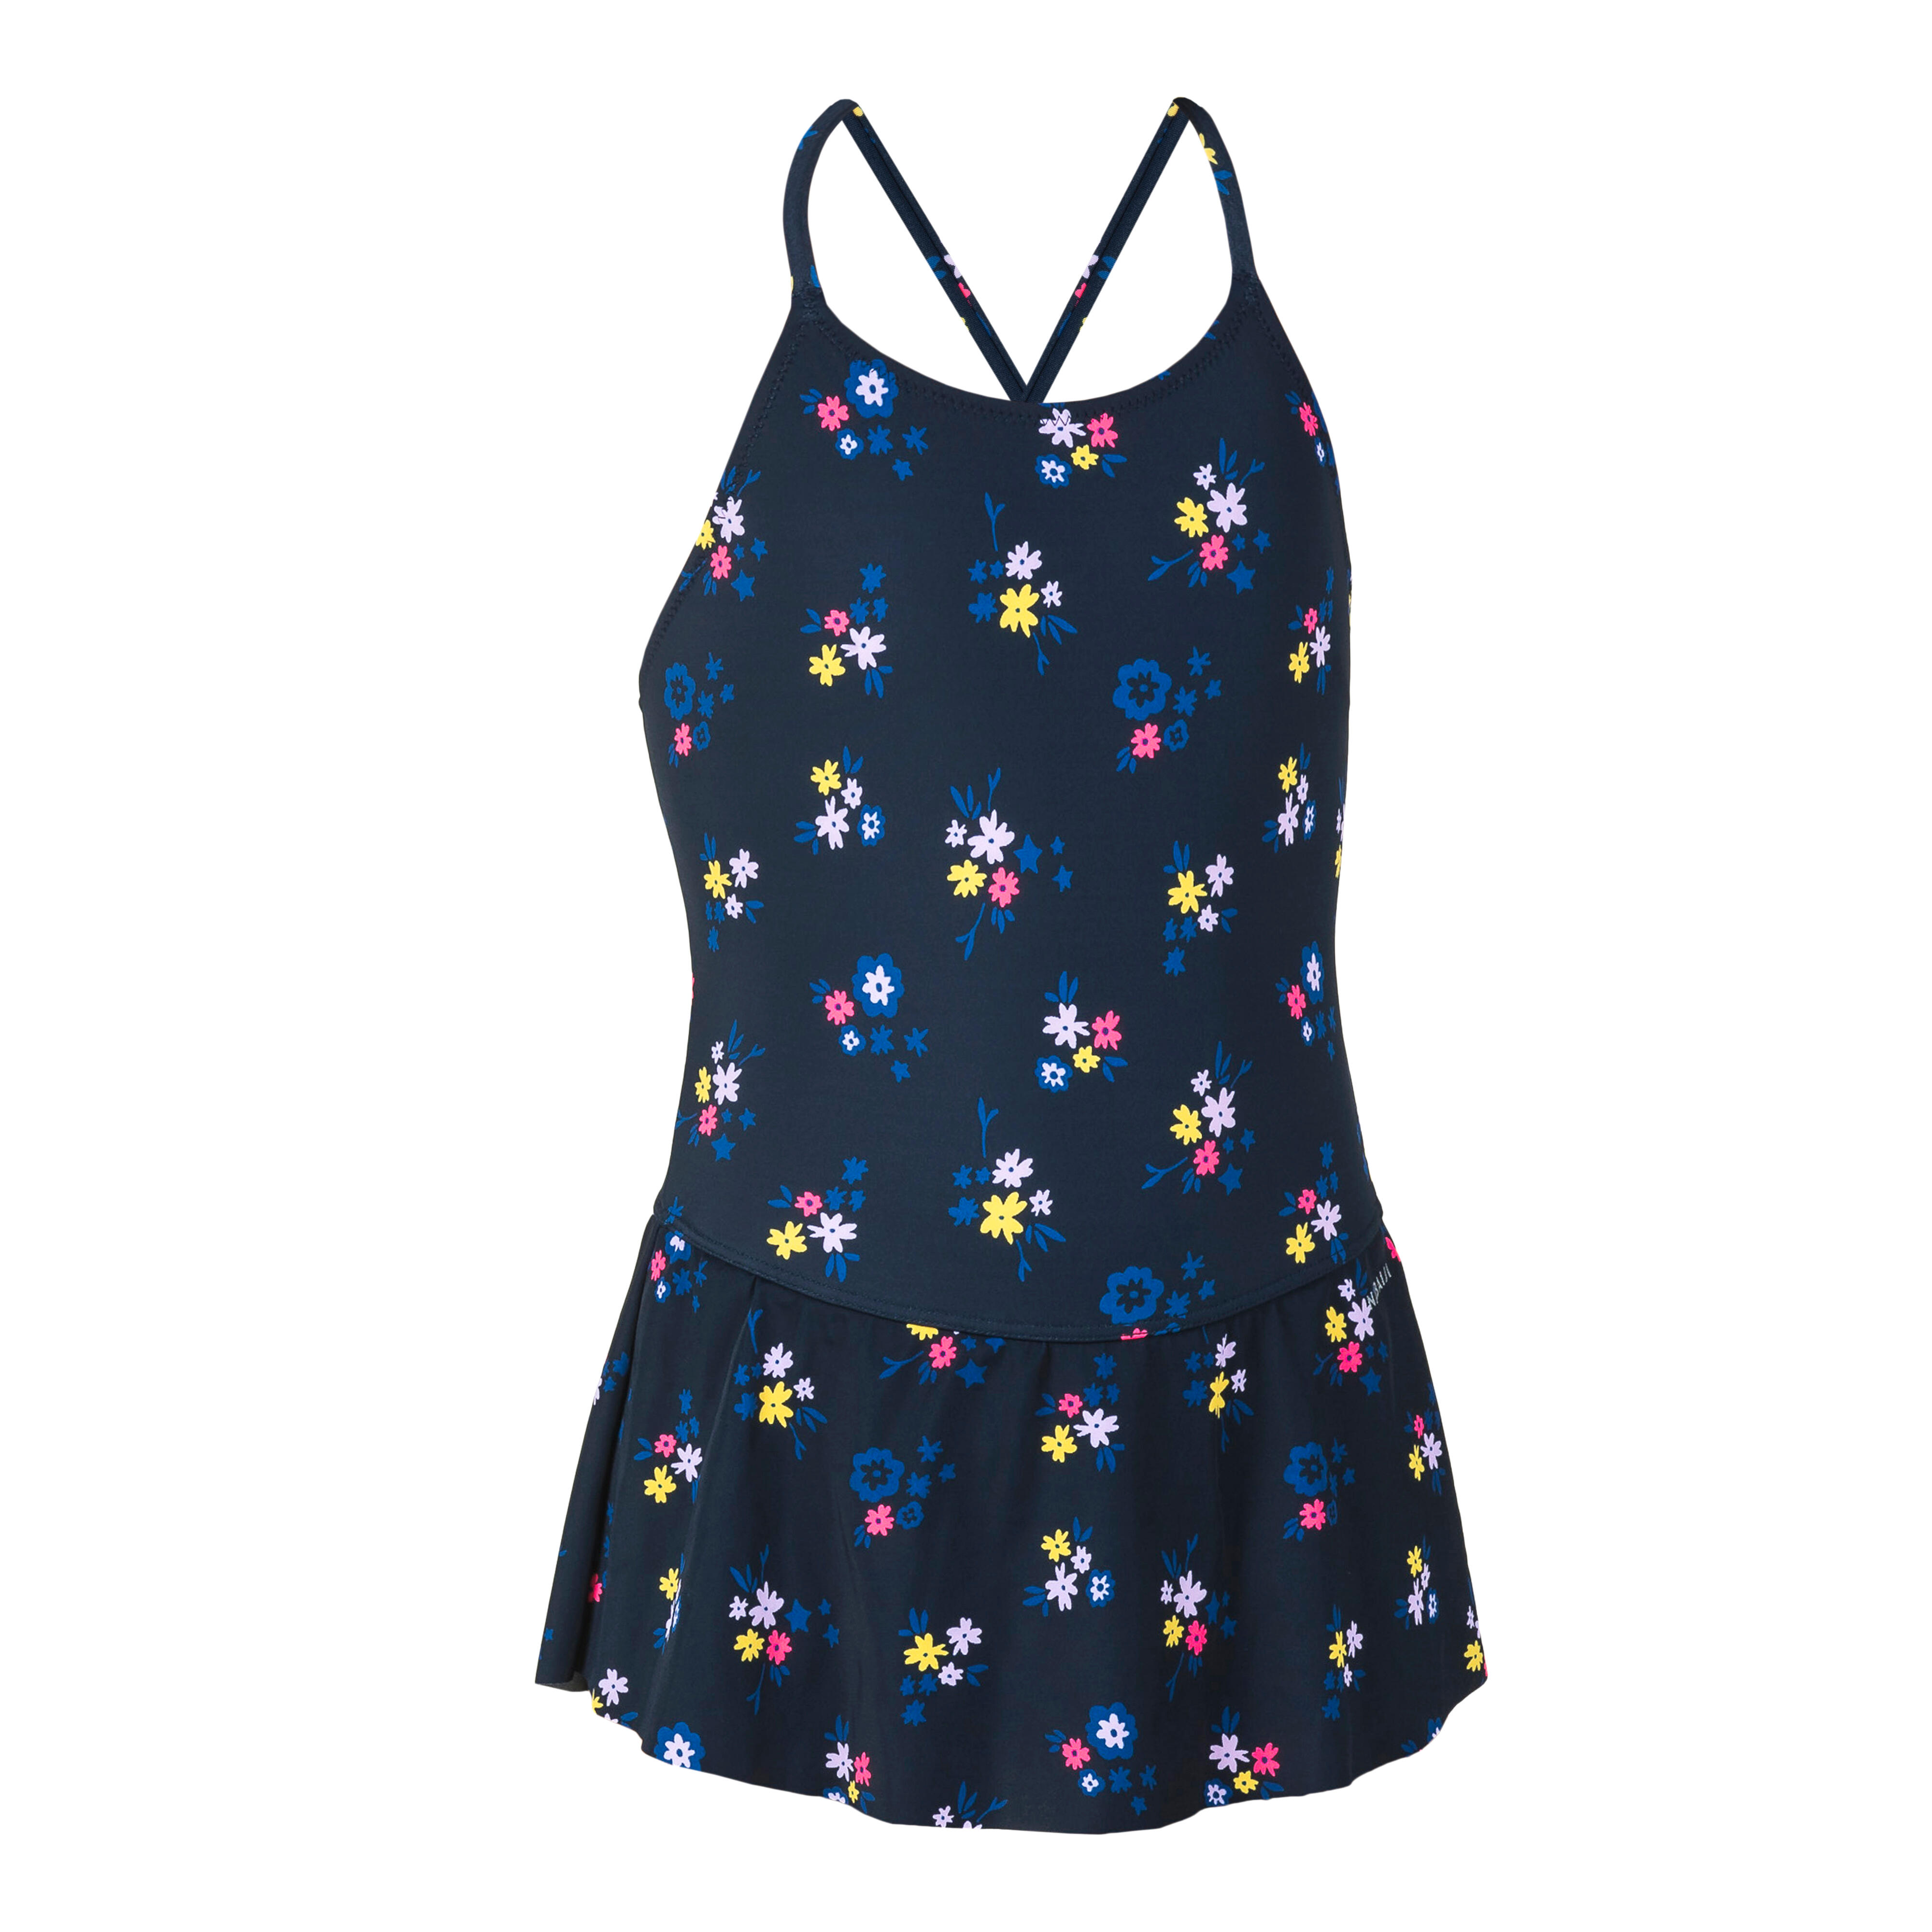 Image of Girls' One-piece Swimsuit with Skirt - Lila Navy